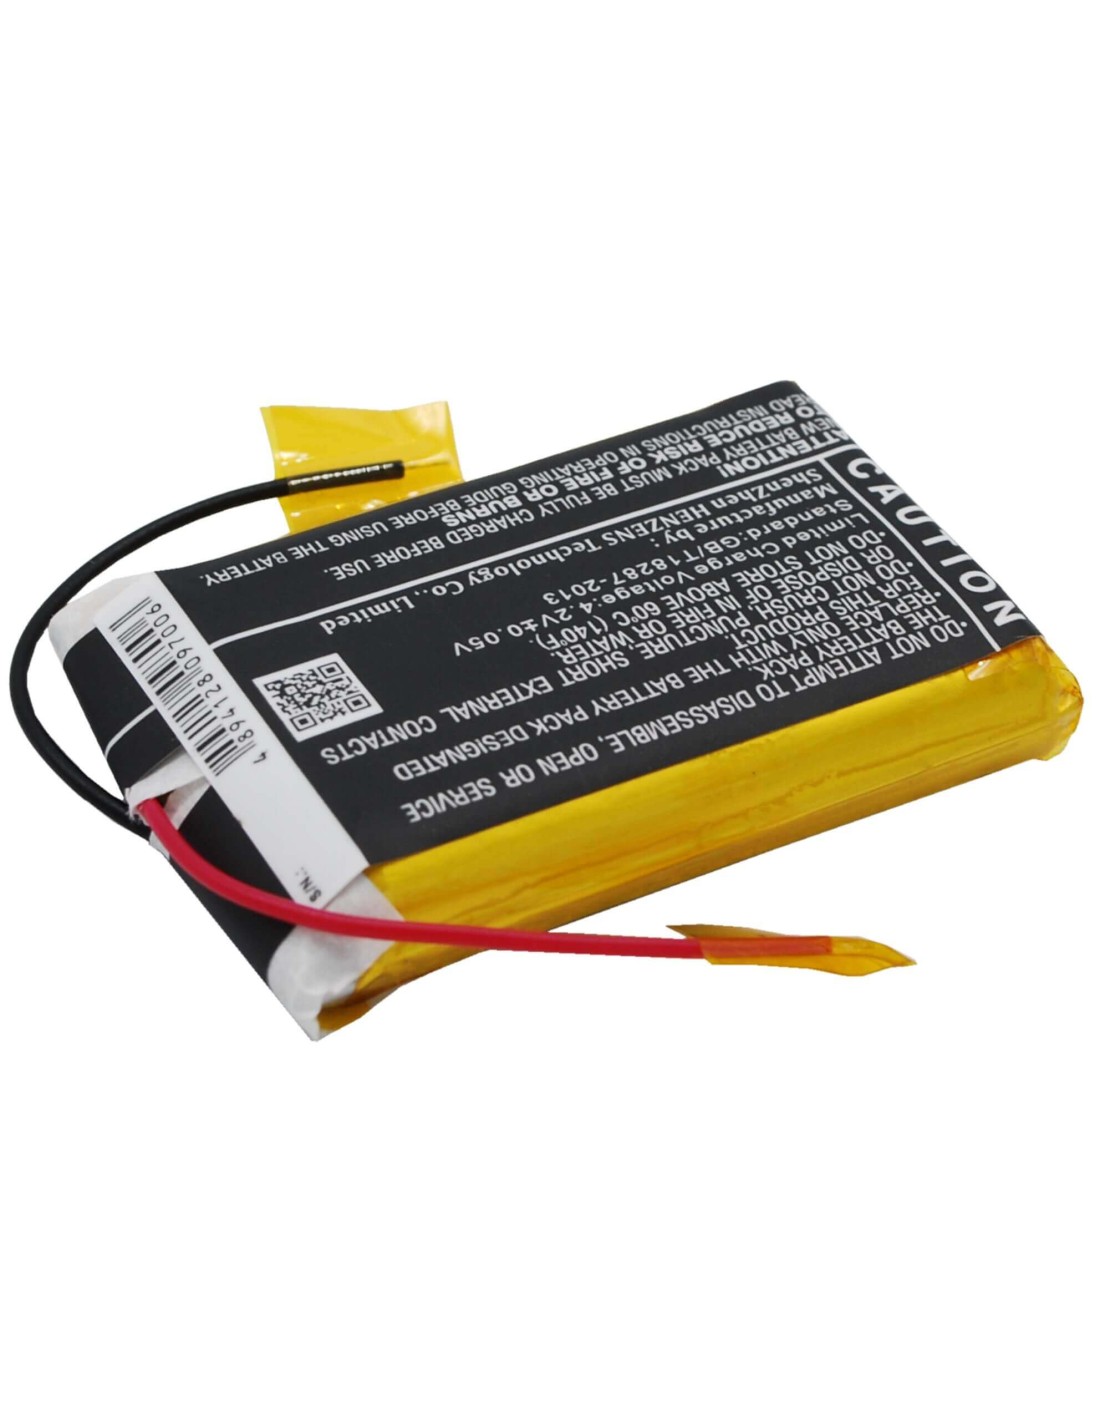 Battery for Roberts, Sports Dab2 3.7V, 1850mAh - 6.85Wh